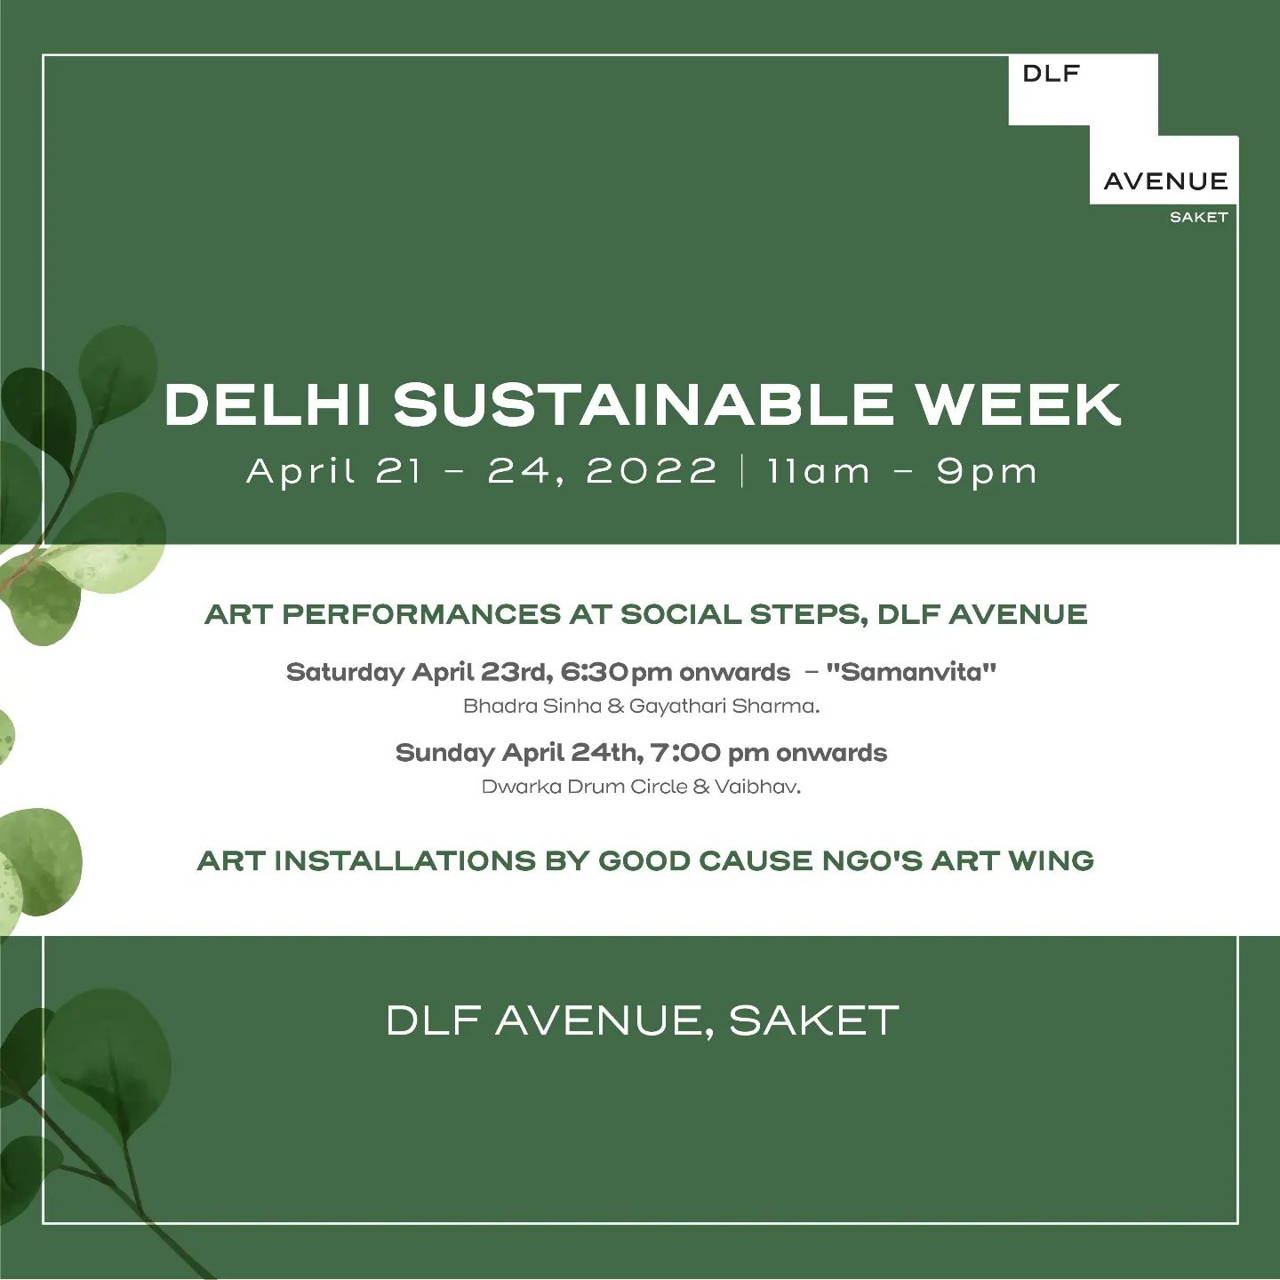 Delhi Sustainable Week Curated by The Conscious Living at DLF Avenue